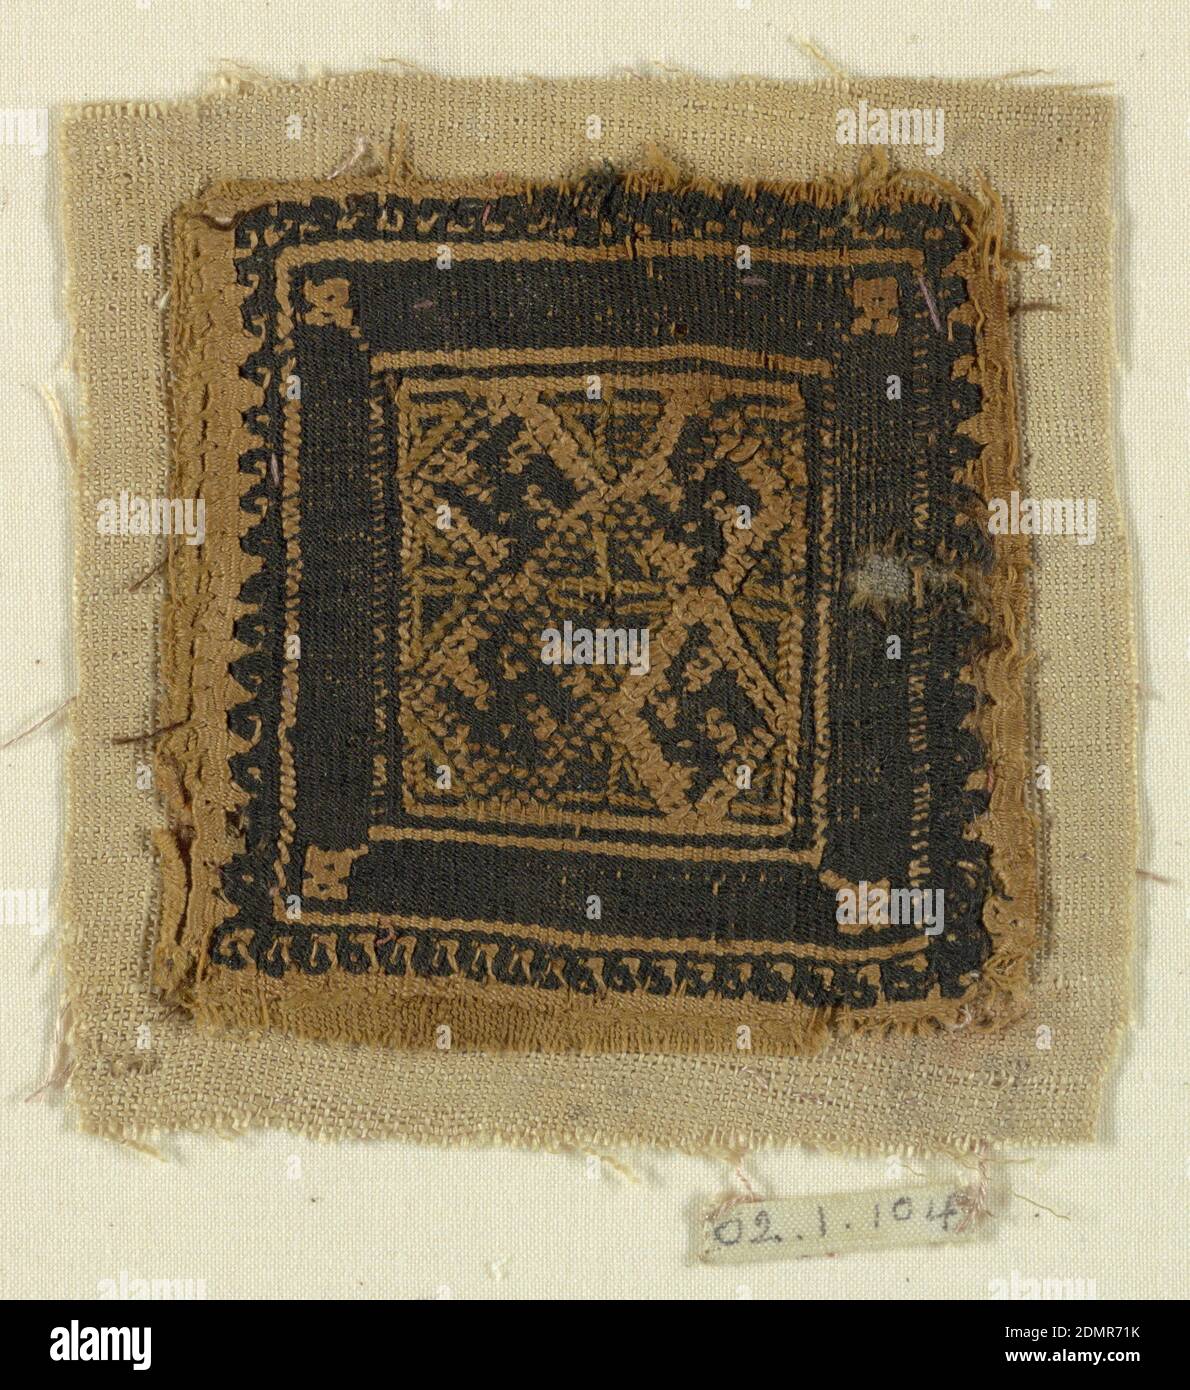 Square, Medium: wool, linen Technique: slit tapestry with supplementary wrapping, Inner square containing four swastikas within plain outer frame. Paint has been applied to the mount., Egypt, 3rd–4th century, woven textiles, Square Stock Photo